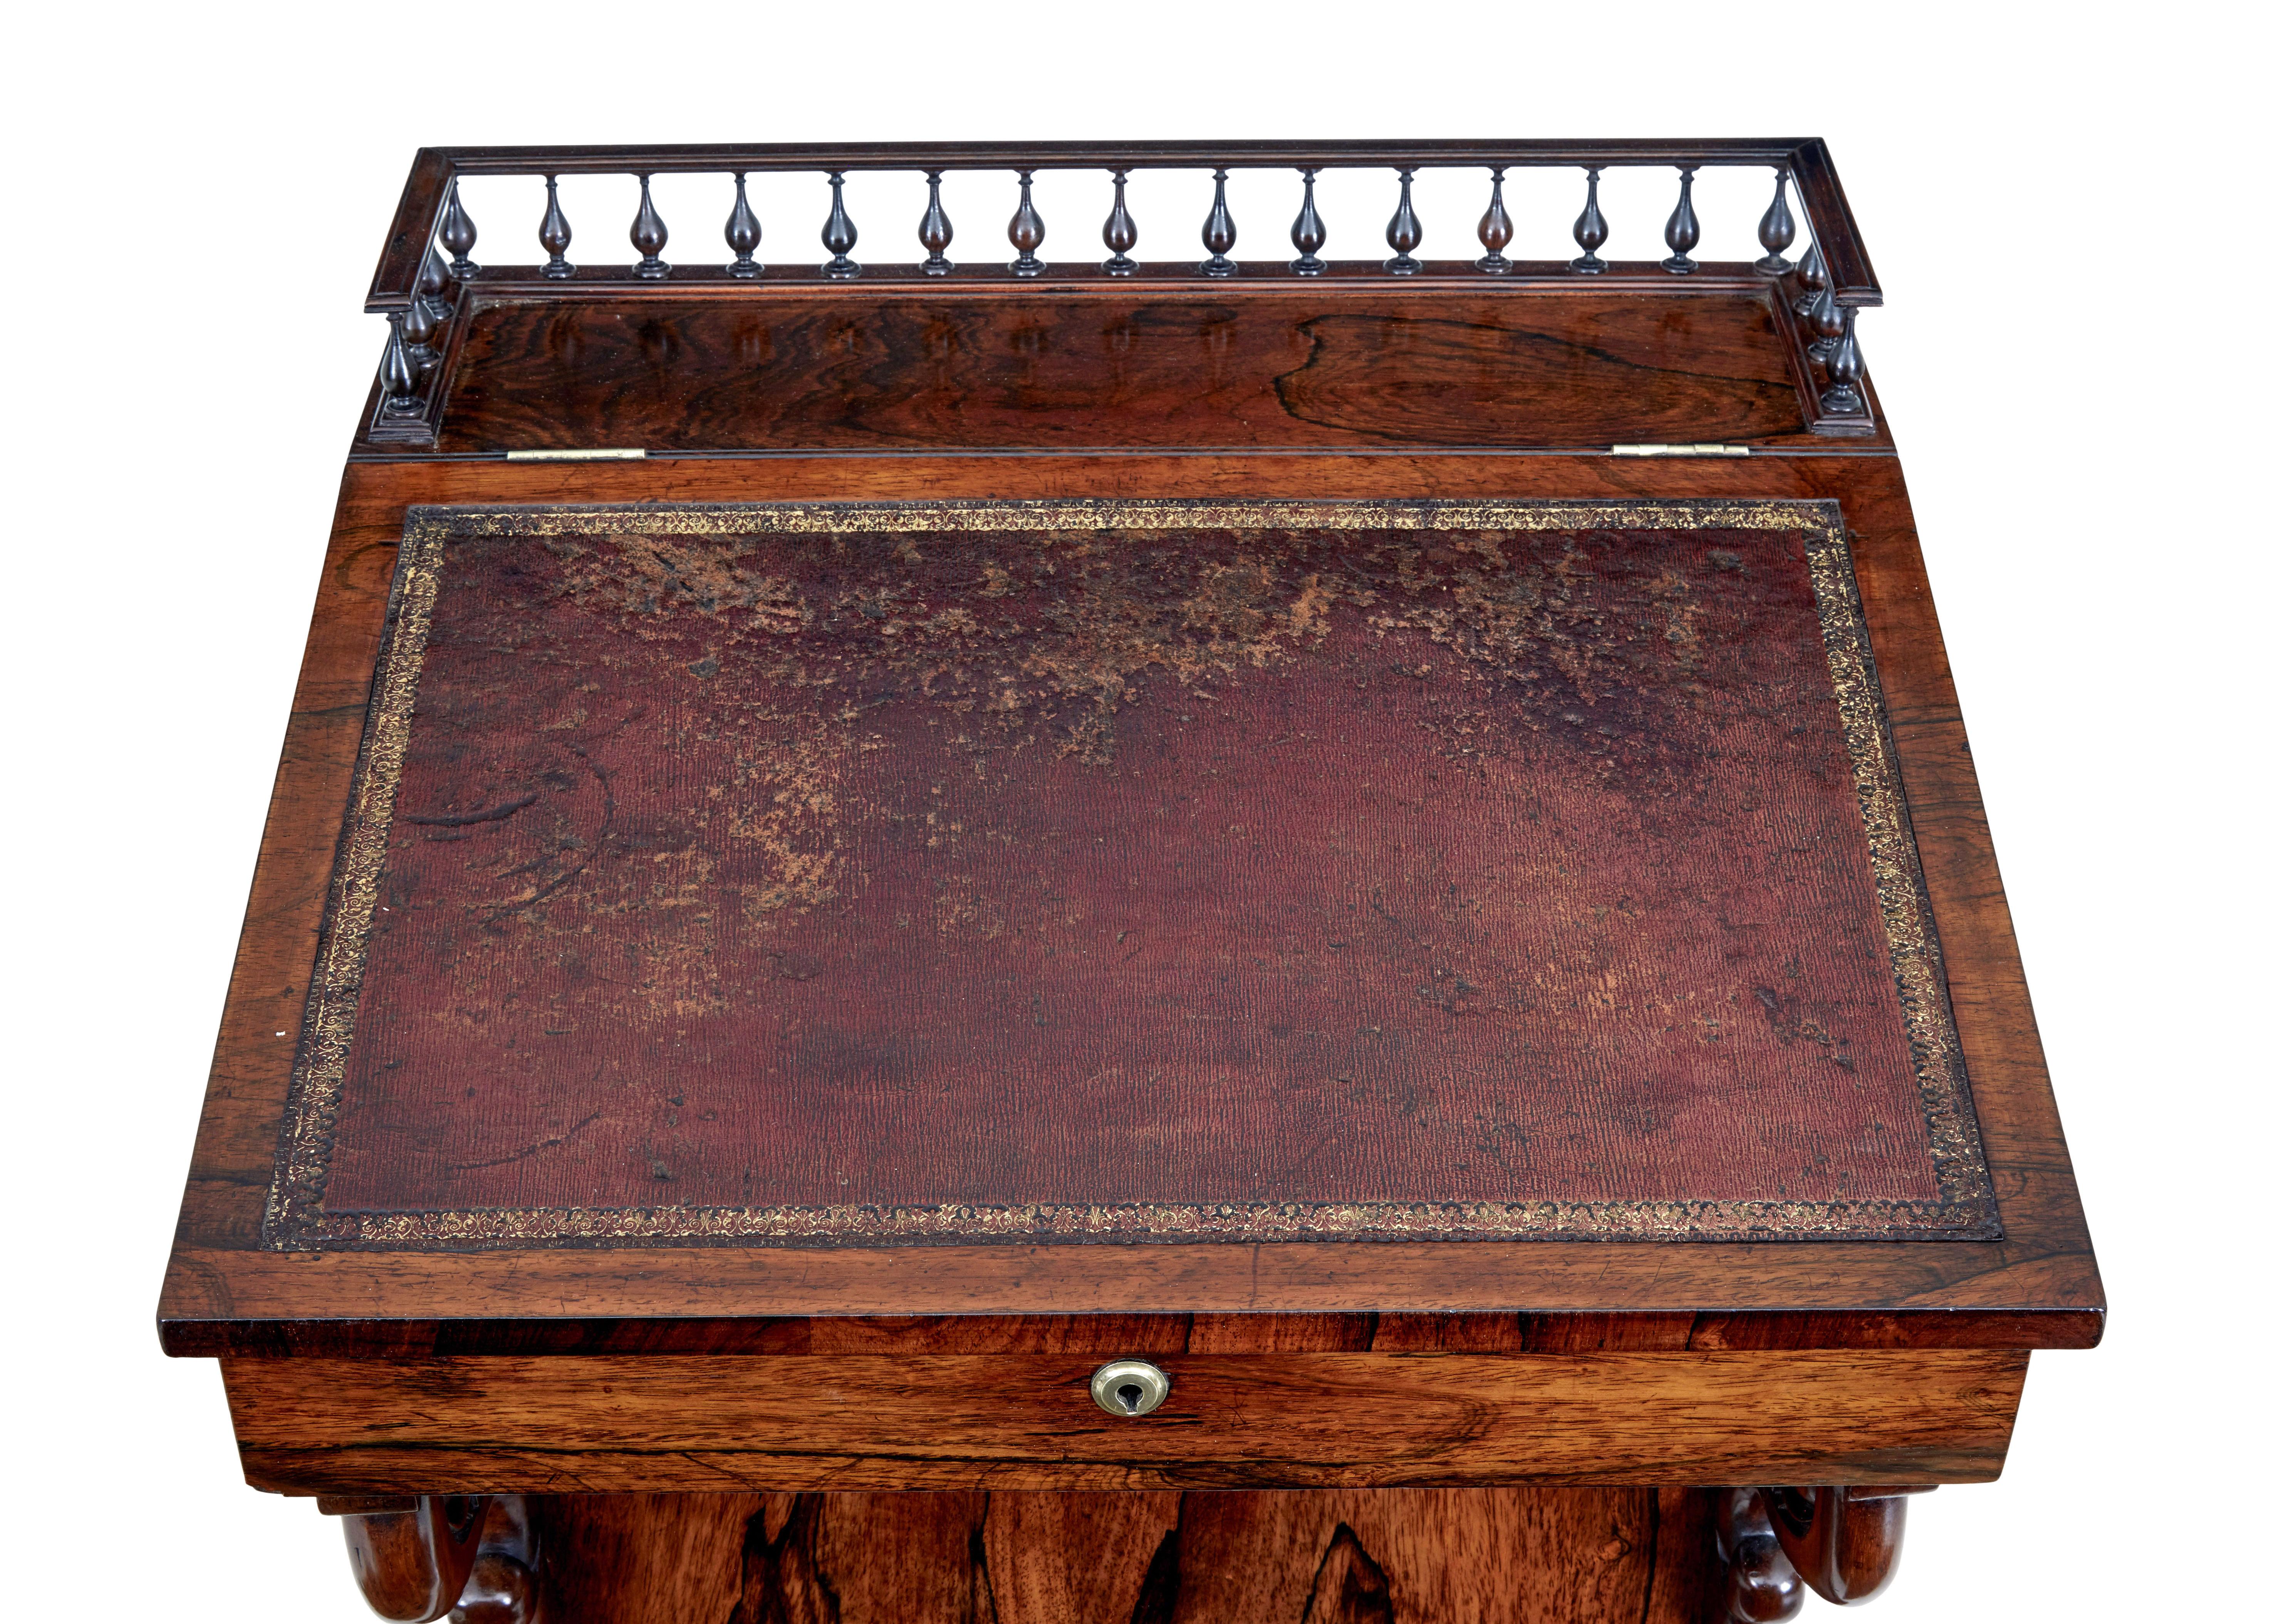 Fine quality regency davenport, circa 1820.

Spindle gallery to the top leading to the original leather writing surface. Top opens to reveal a richly colored interior with 2 drawers.
Writing slope lifts up and with the aid of 2 brass arms, maintains